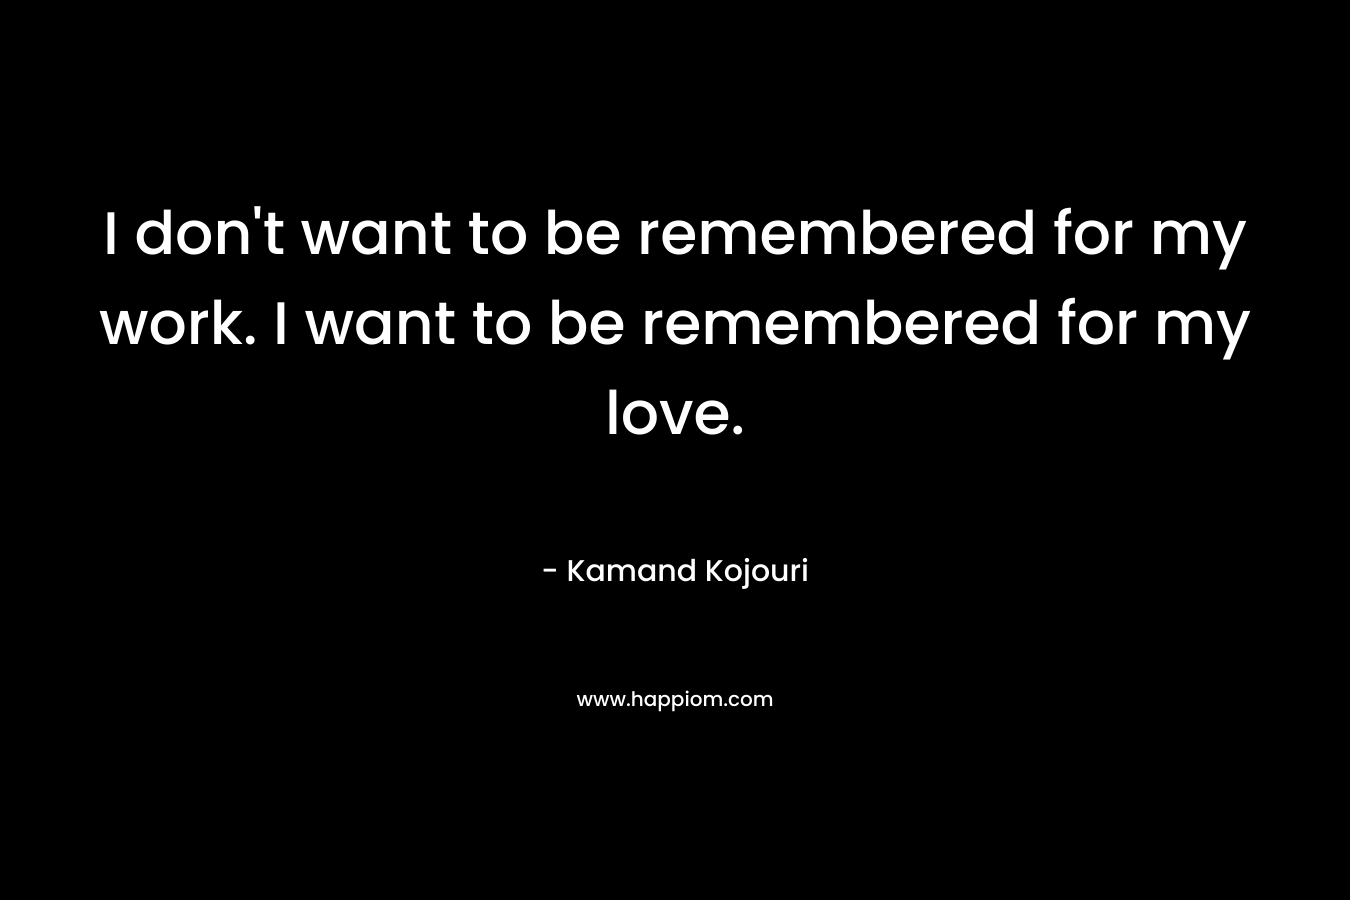 I don't want to be remembered for my work. I want to be remembered for my love.